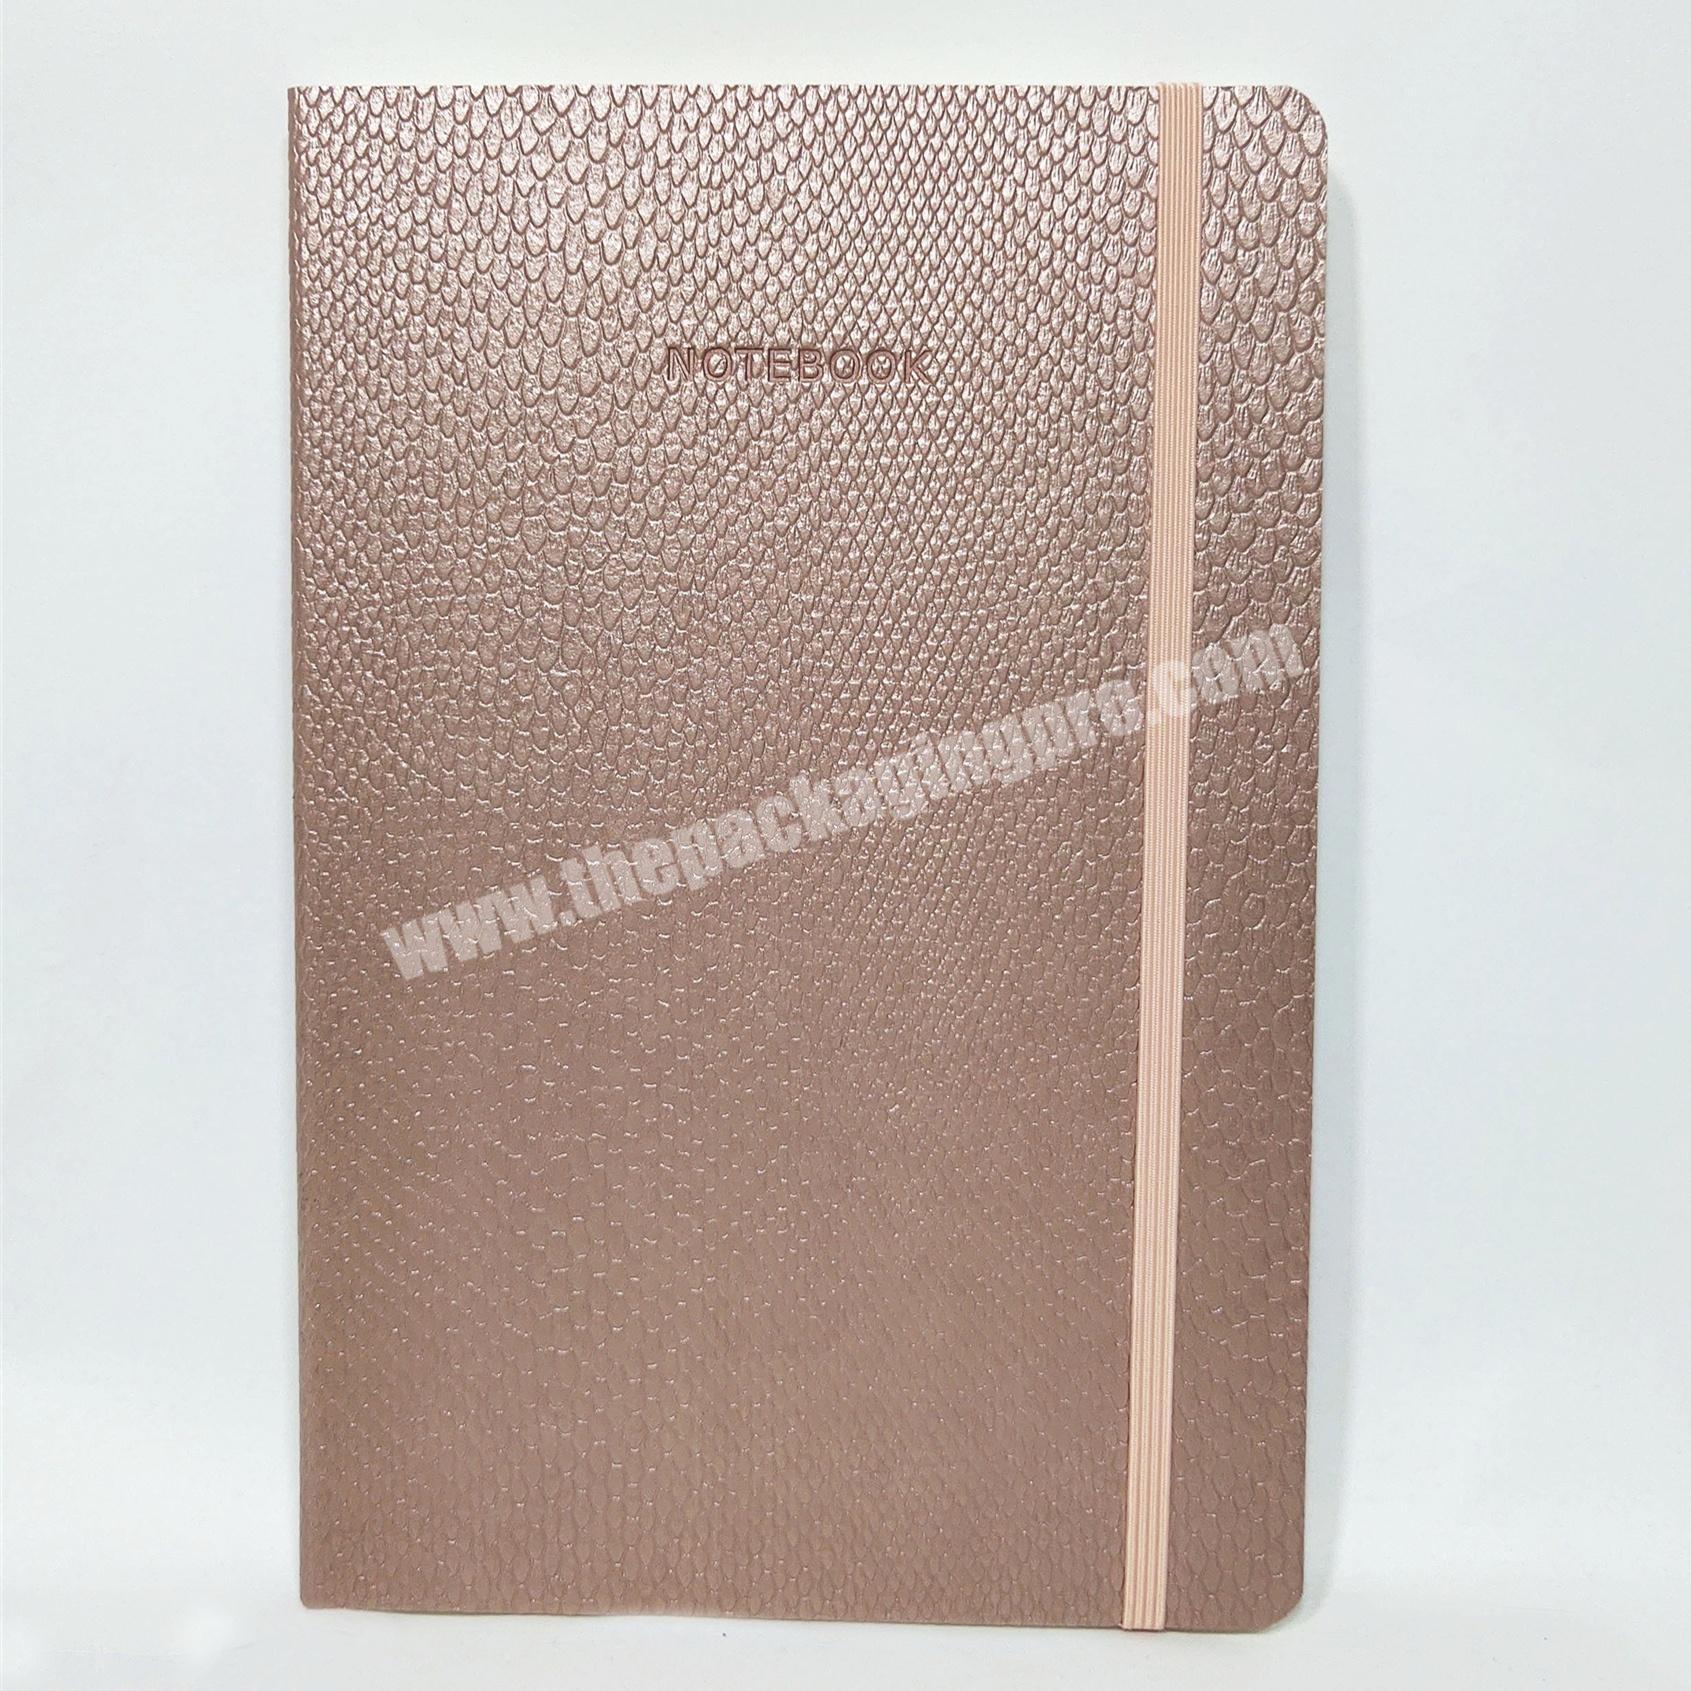 Good selling customized notebook business agenda academic planner for student